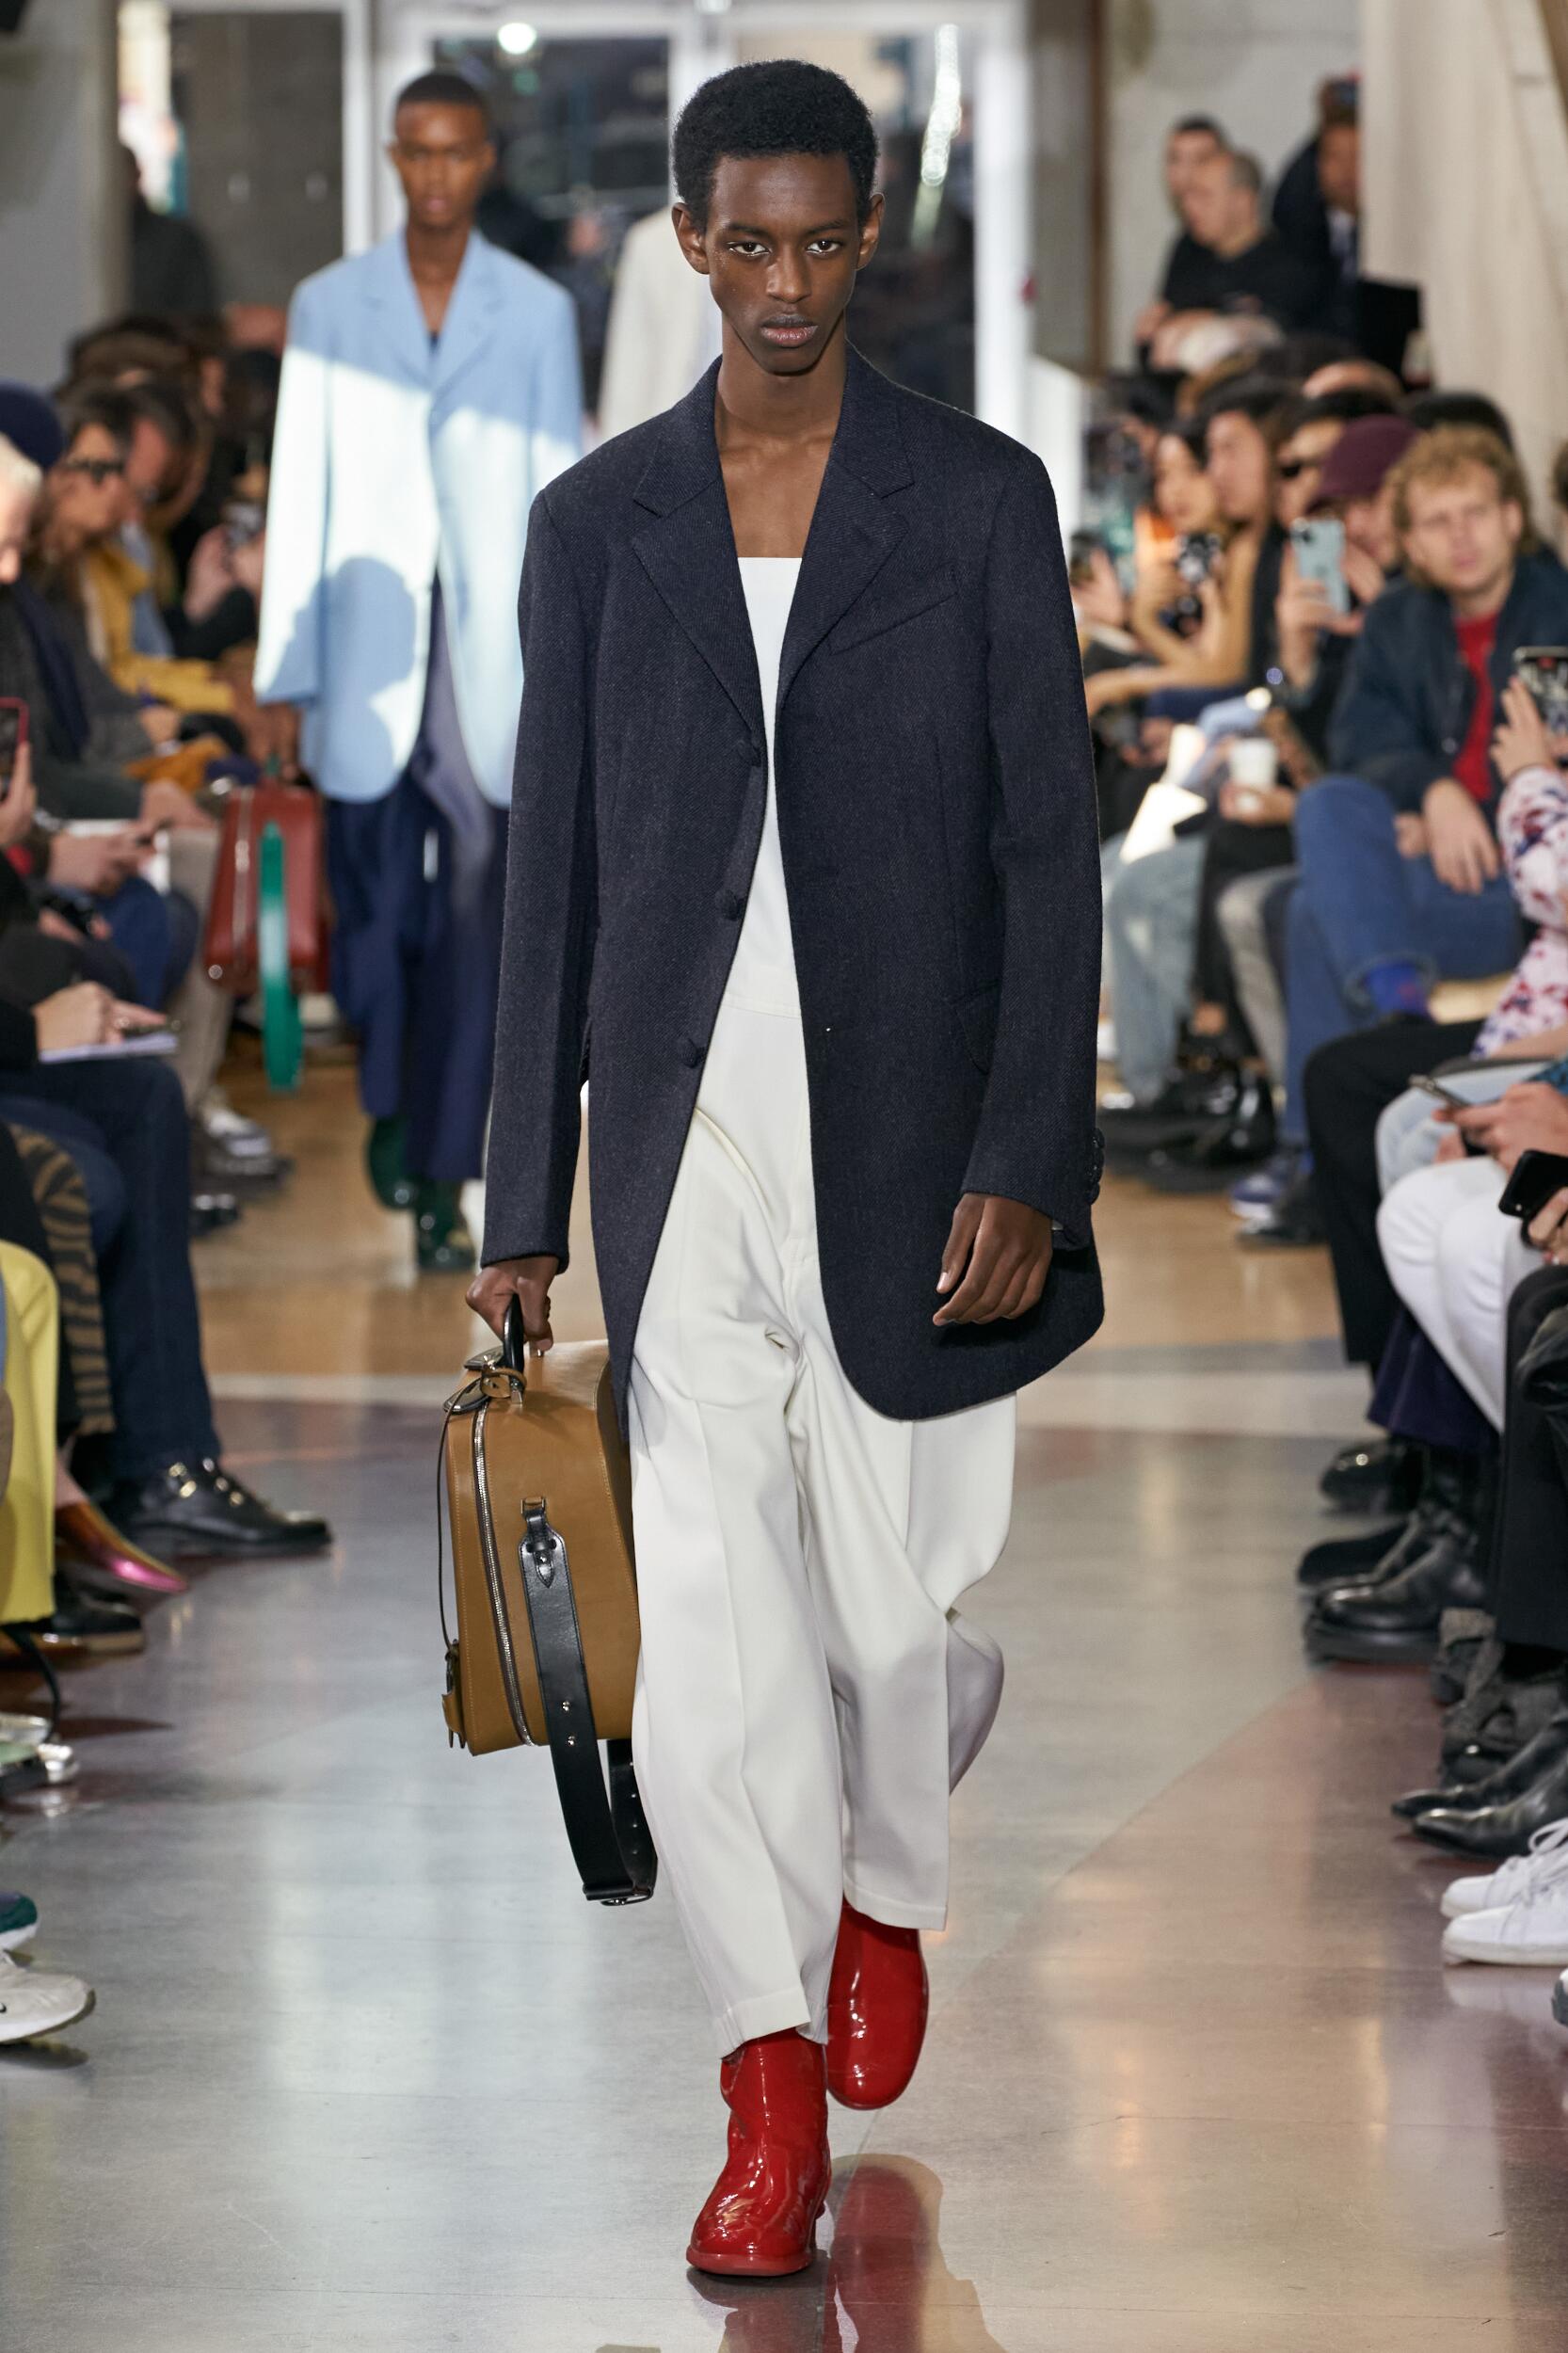 LANVIN FALL WINTER 2020 MEN’S COLLECTION | The Skinny Beep